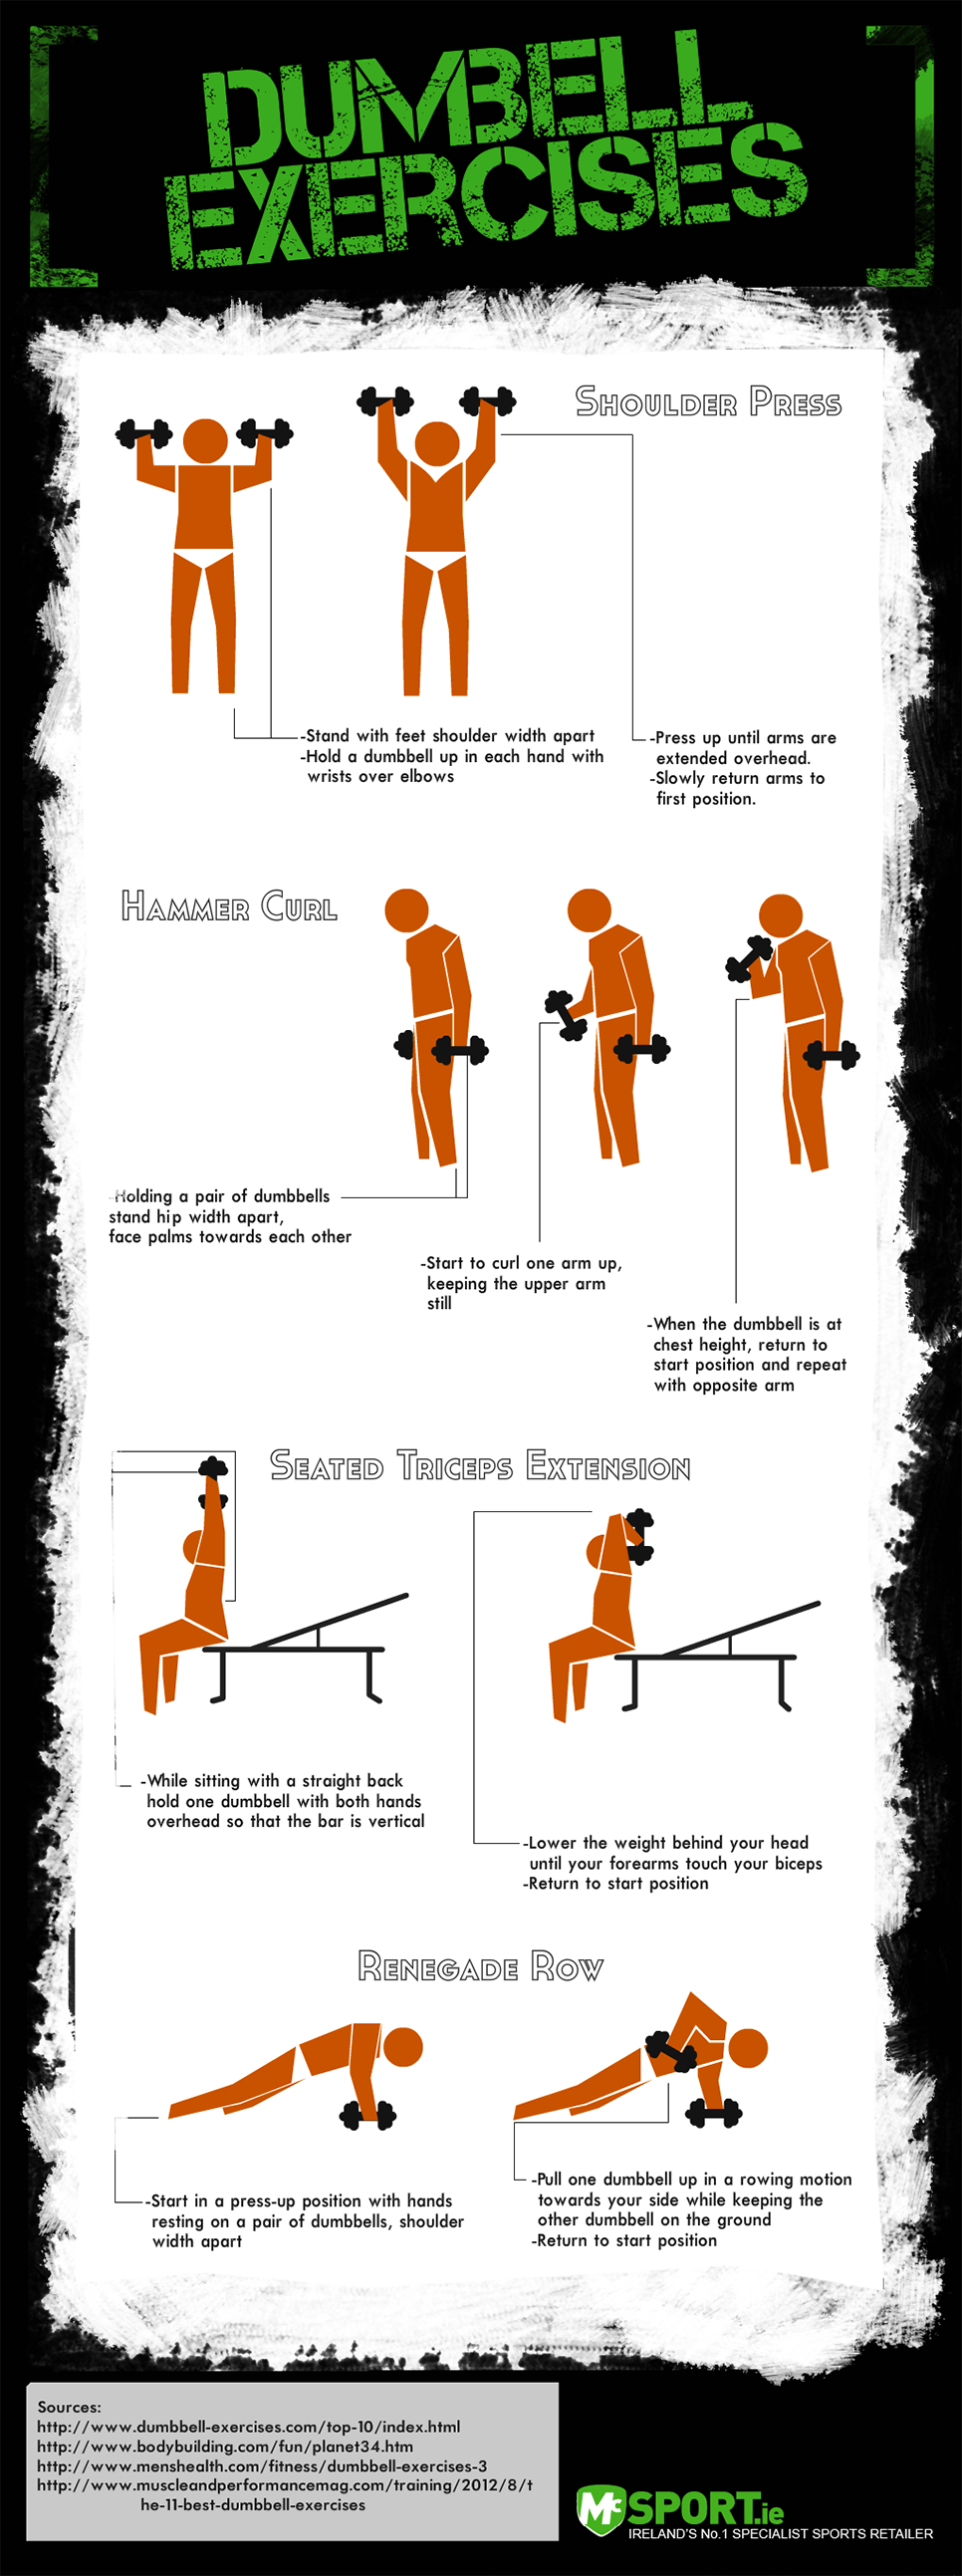 Dumbbell exercises infographic